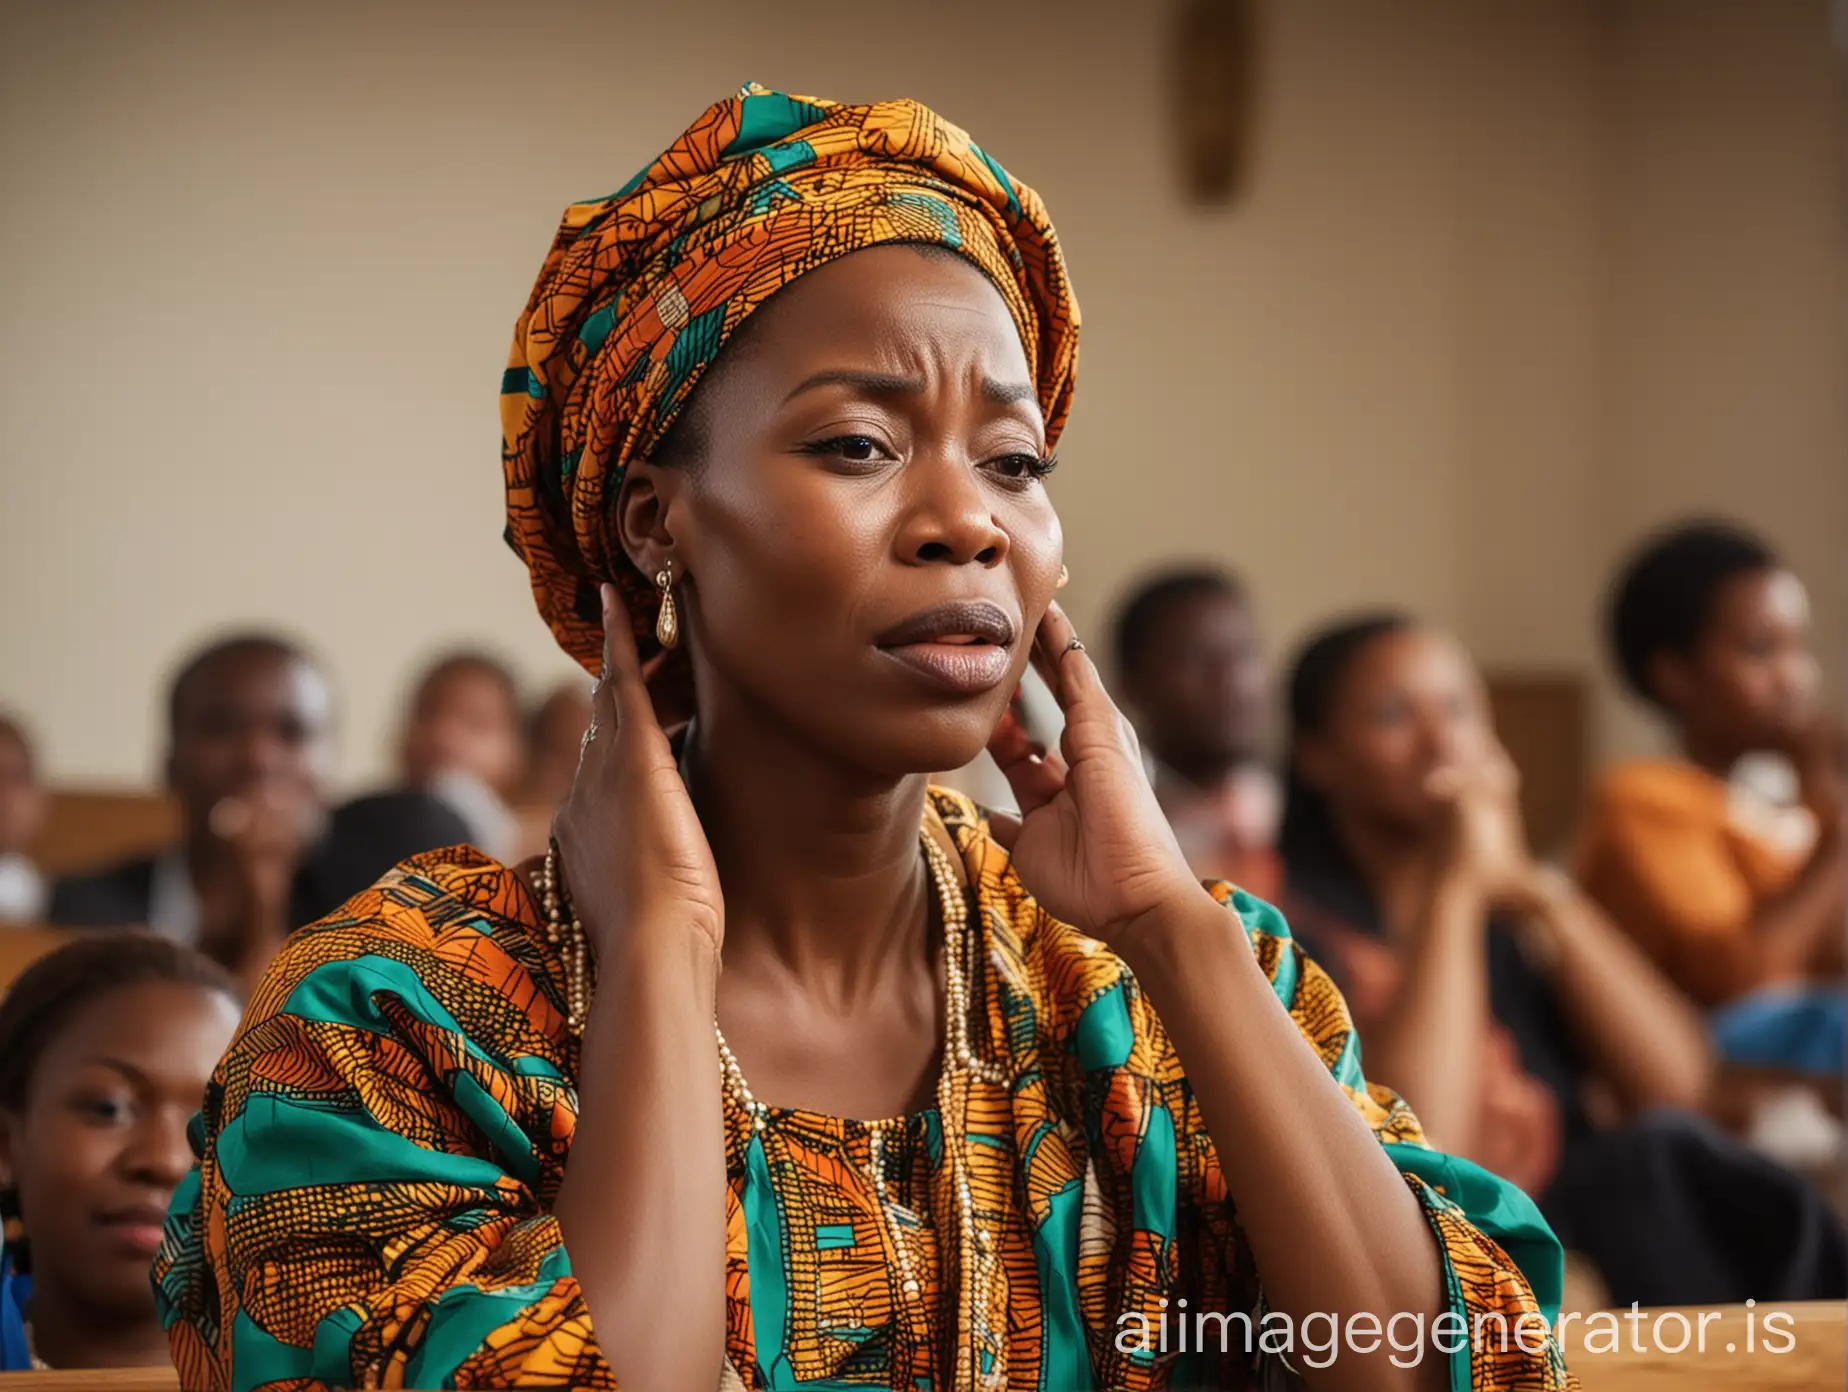 african woman47 years old in african attire crying in town hall meeting